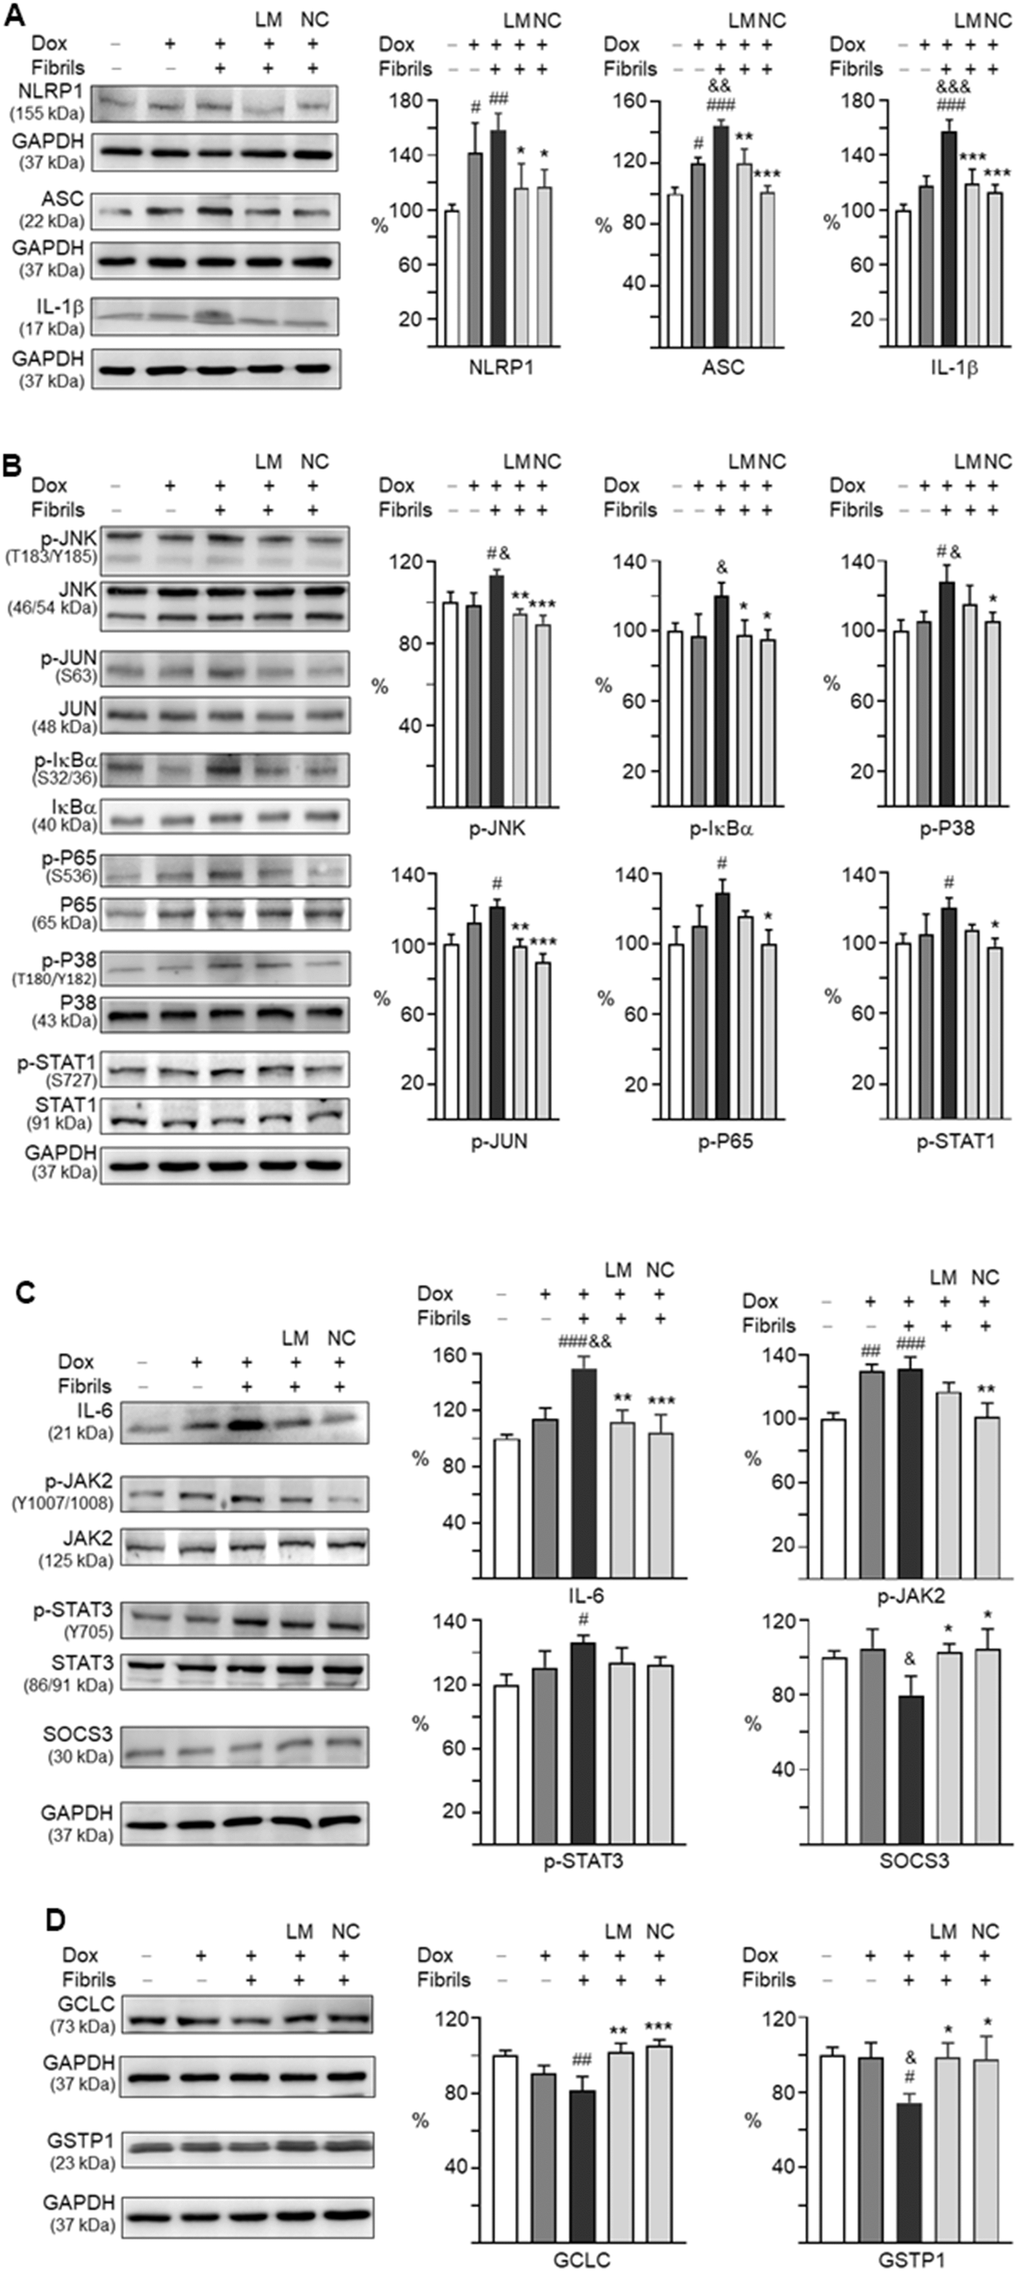 Effects of LM-021 and NC009-1 on IL-1β- and IL-6-mediated inflammatory and GCLC- and GSTP1-mediated redox signaling in A53T-8 SNCA-GFP BE(2)-M17 cells. Western blot analysis of (A) NLRP1, NLRP3, ASC, IL-1β, (B) JNK (T183/Y185), JUN (S63), IκBα (S32/36), P65 (S536), P38 (T180/Y182), STAT1 (S727), (C) IL-6, JAK2 (Y1007/1008), STAT3 (Y705), and SOCS3, and (D) GCLC and GSTP1. GAPDH was used as an internal control (n = 3). For normalization, the NLRP1, NLRP3, ASC, IL-1β, JNK, JUN, IκBα, P65, P38, STAT1, IL-6, JAK2, STAT3, SOCS3, GCLC and GSTP1 in uninduced cells was set at 100%. P values: with vs. without doxycycline induction (#: P ##: P ###: P &: P &&: P &&&: P P P P 